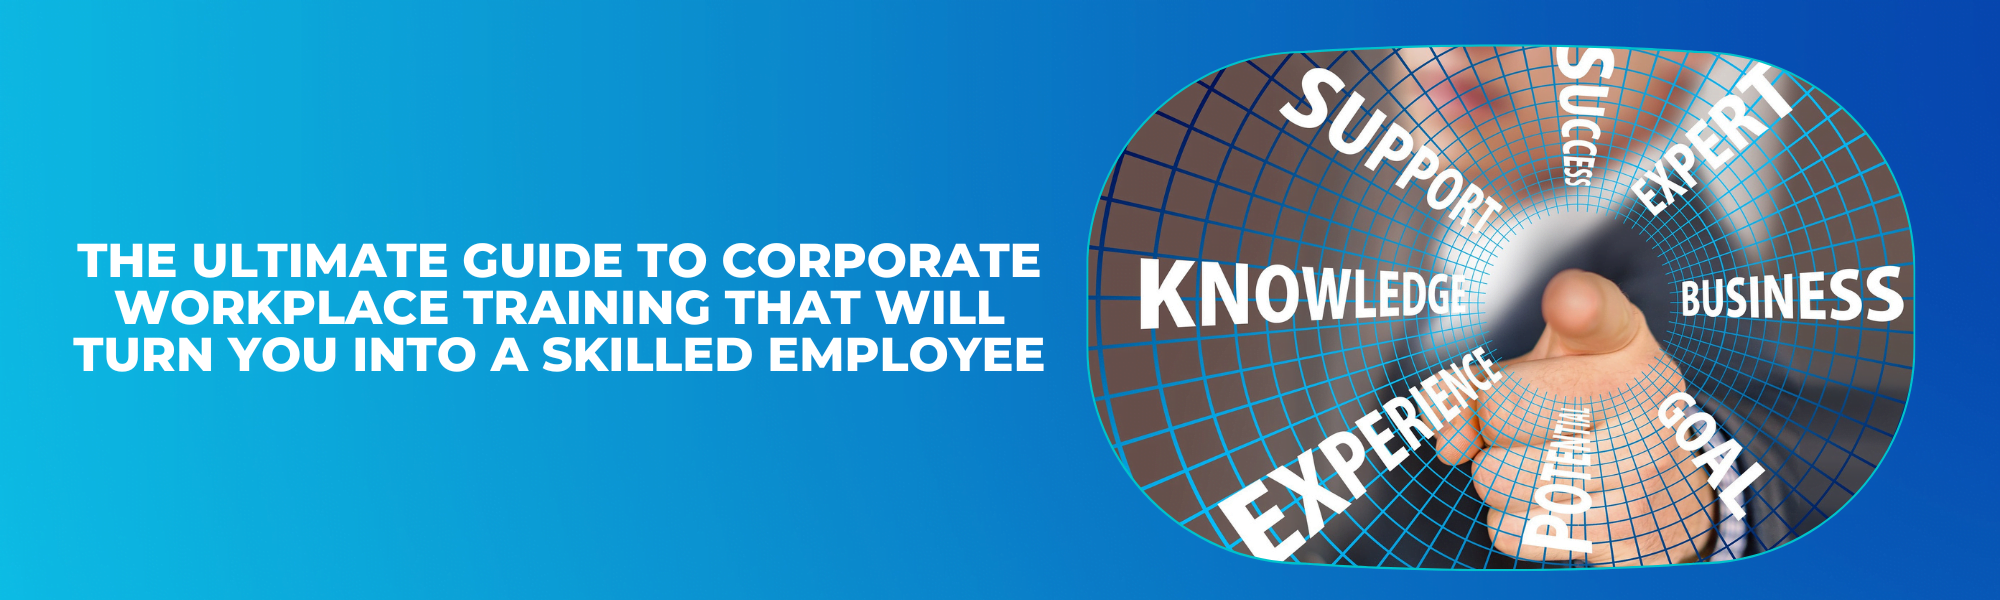 The Ultimate Guide to Corporate Workplace Training That Will Turn You into a Skilled Employee